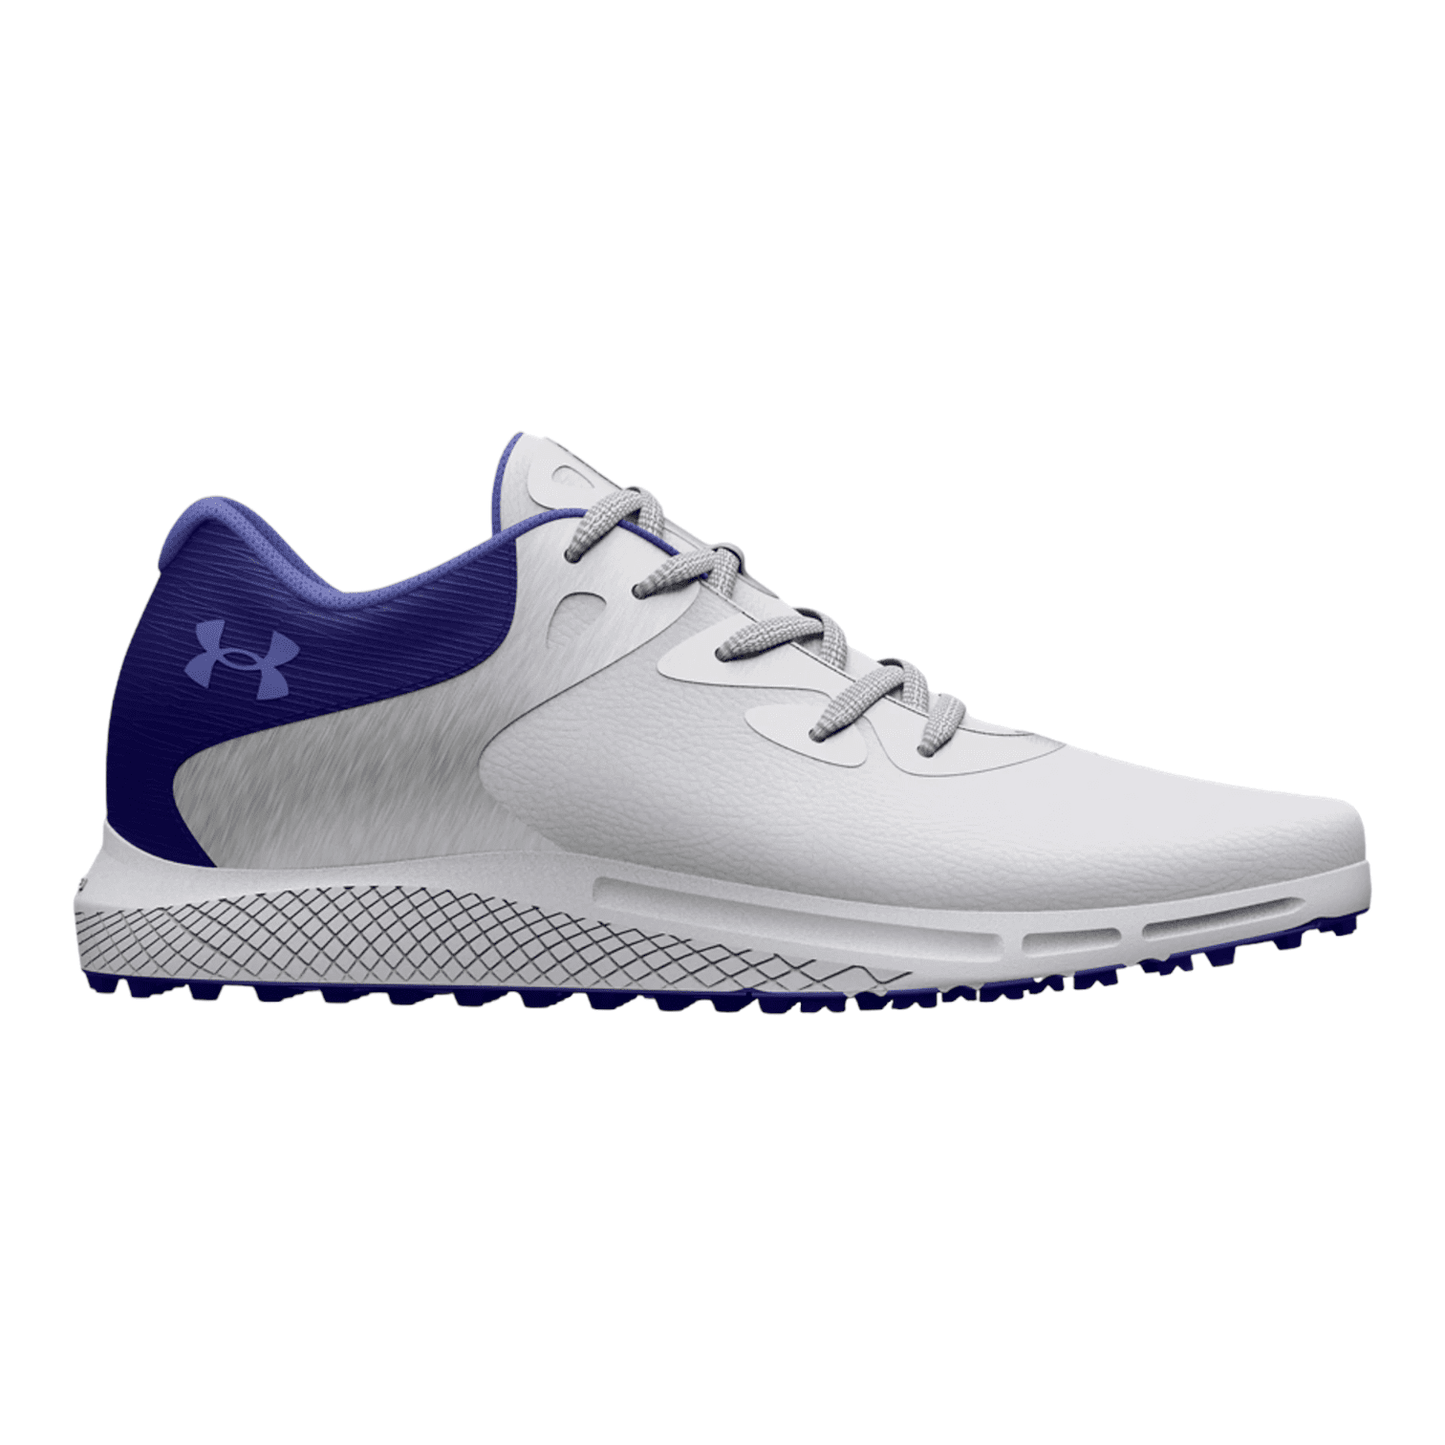 Under Armour Ladies Charged Breathe 2 SL Golf Shoes 3026403